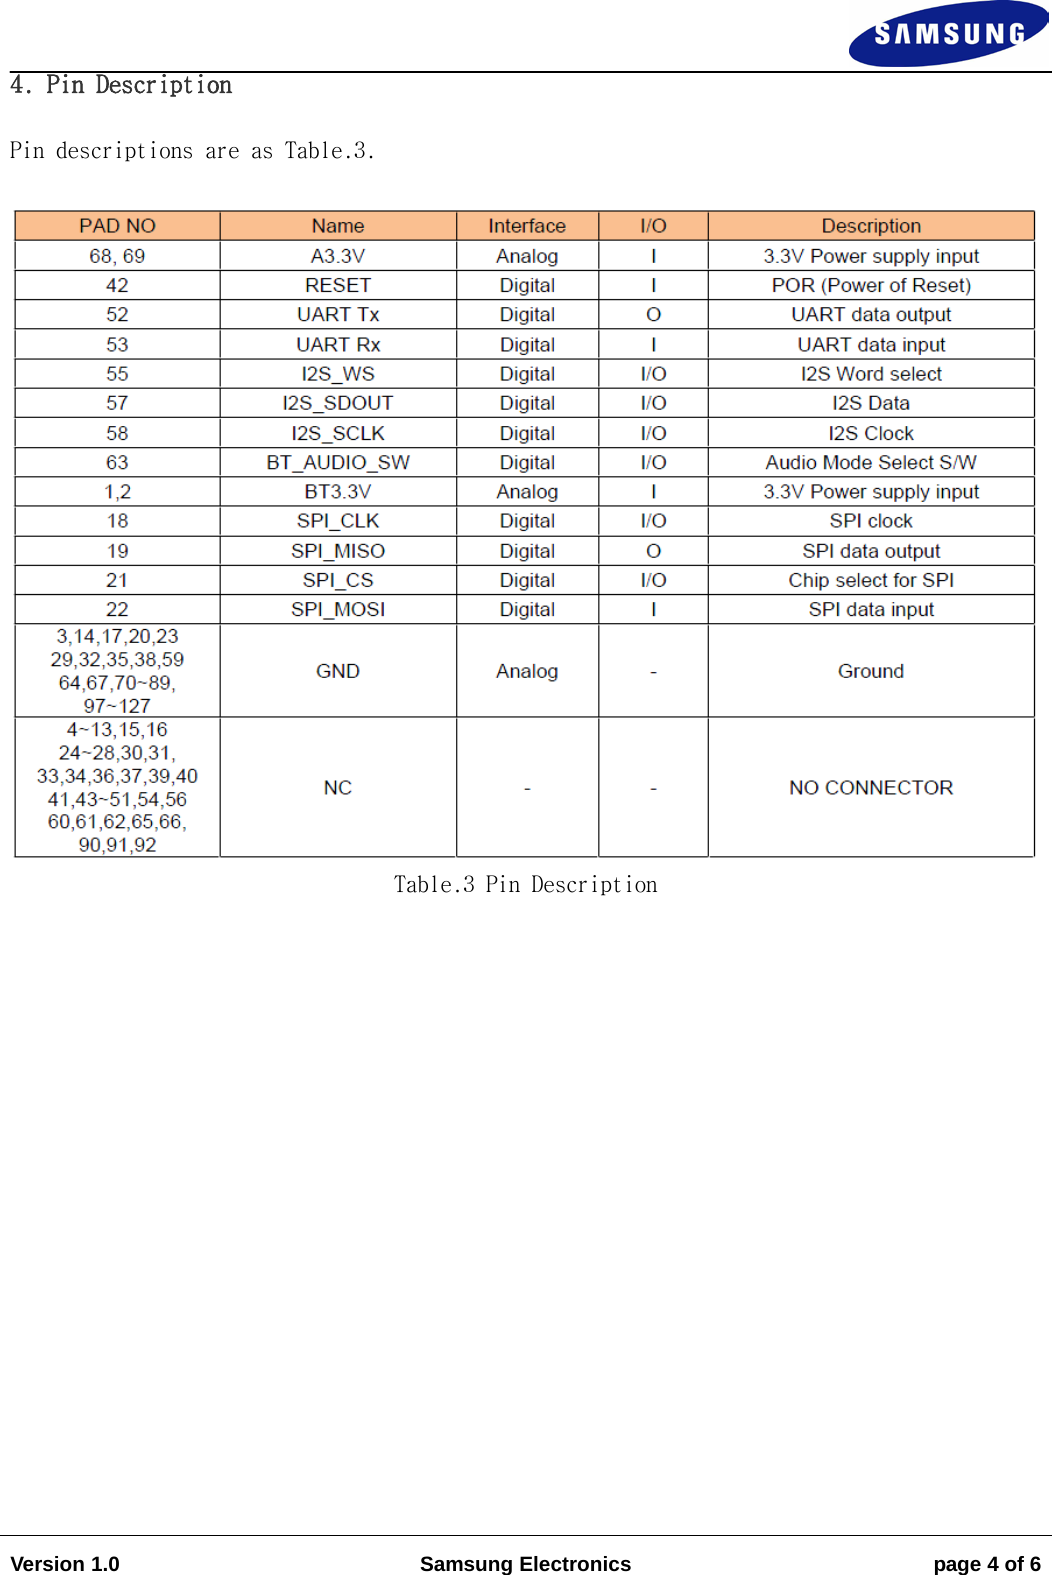                                                                                                                                                                    Version 1.0 Samsung Electronics page 4 of 6   4. Pin Description  Pin descriptions are as Table.3.   Table.3 Pin Description                    